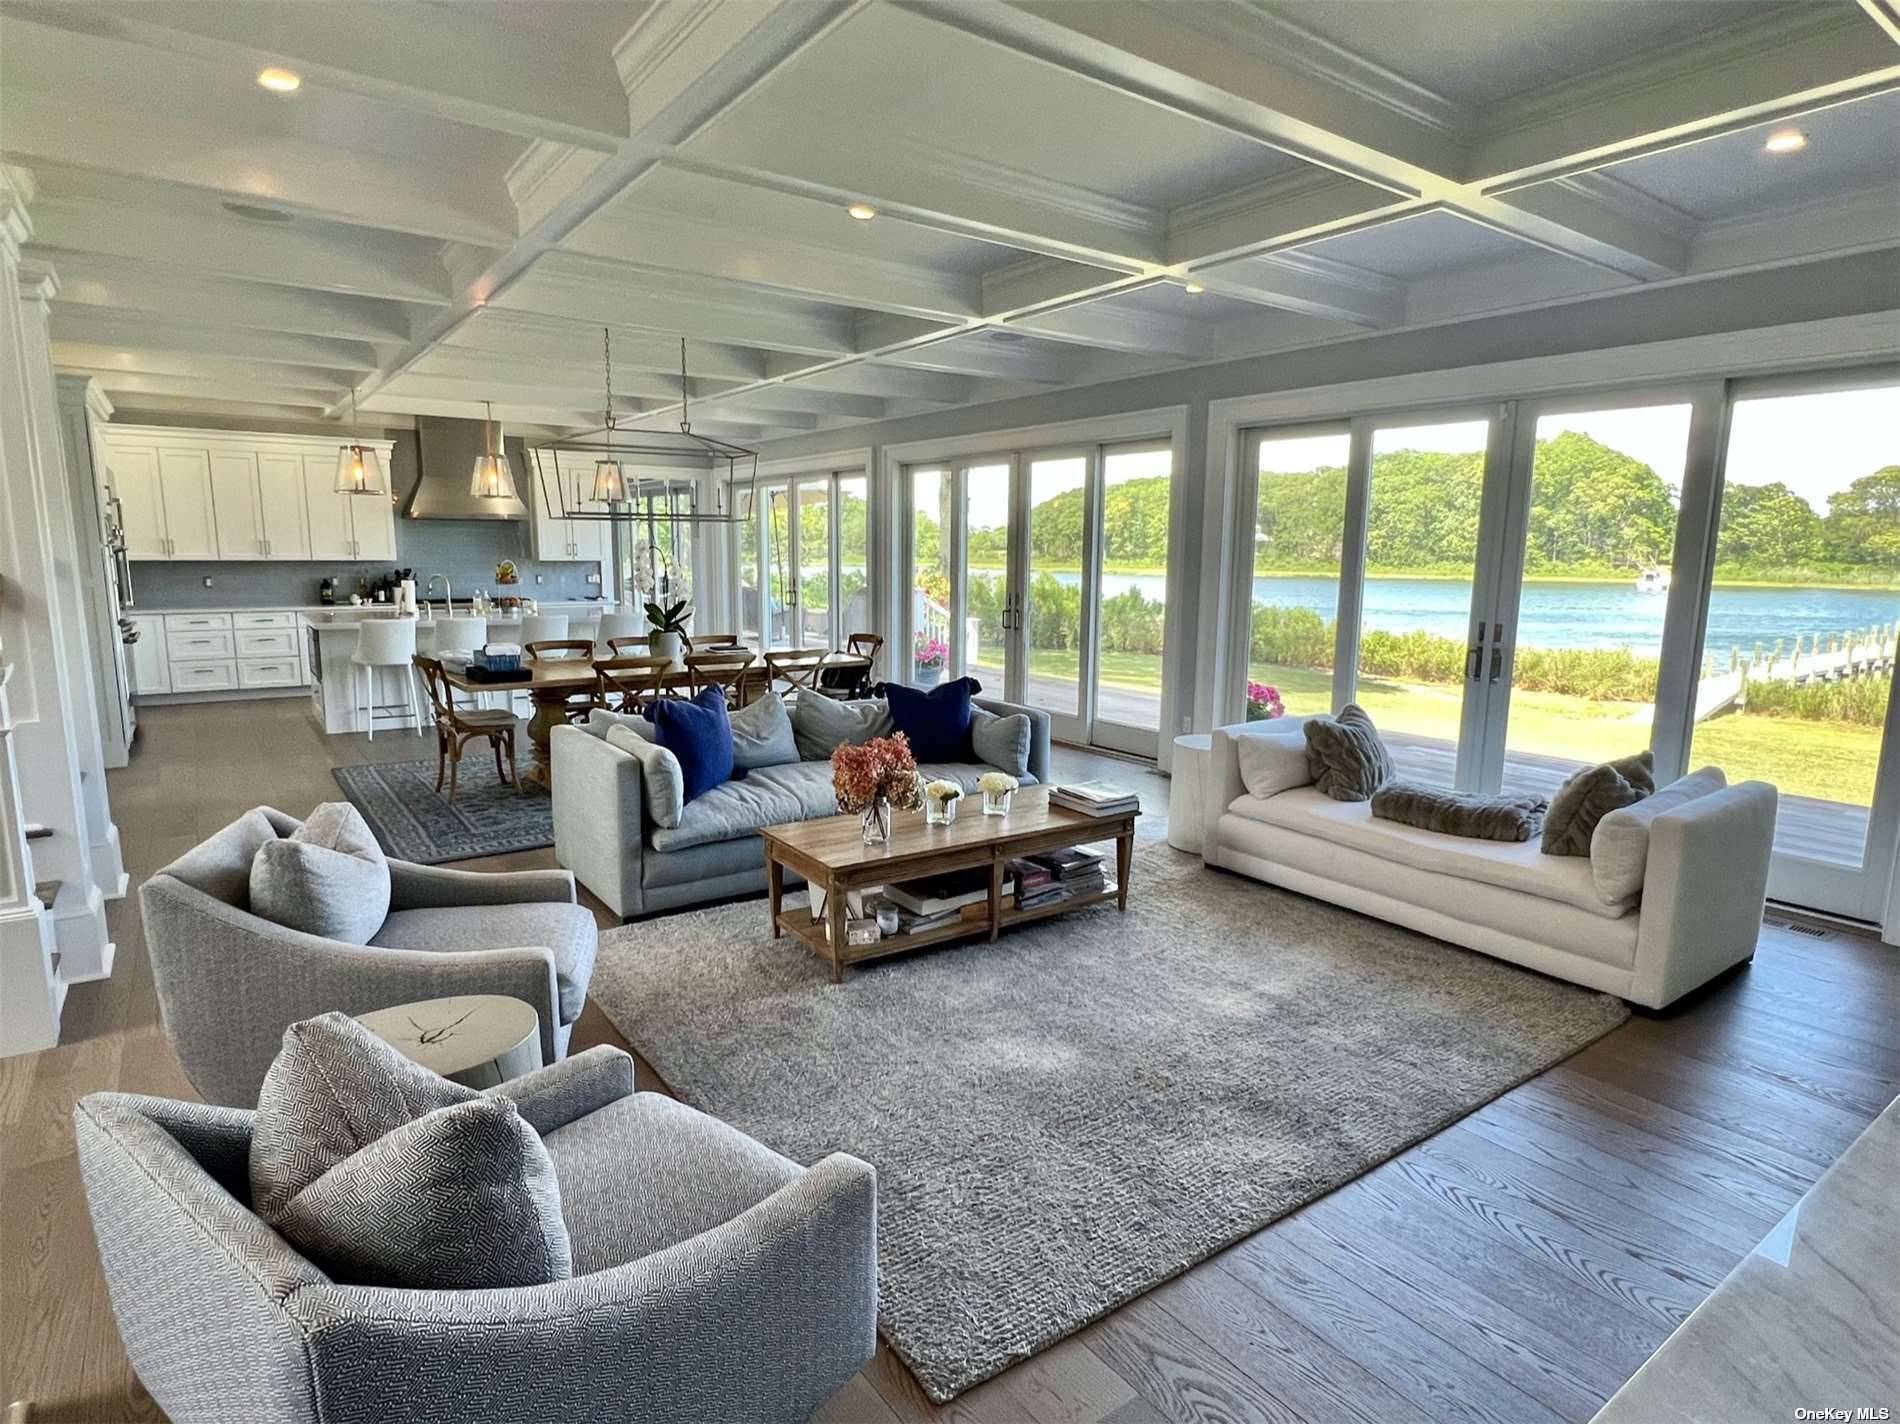 Nantucket style waterfront home on the North Fork with creek access to from Peconic Bay 600 feet of waterfront, floating dock and a 1200 sq.